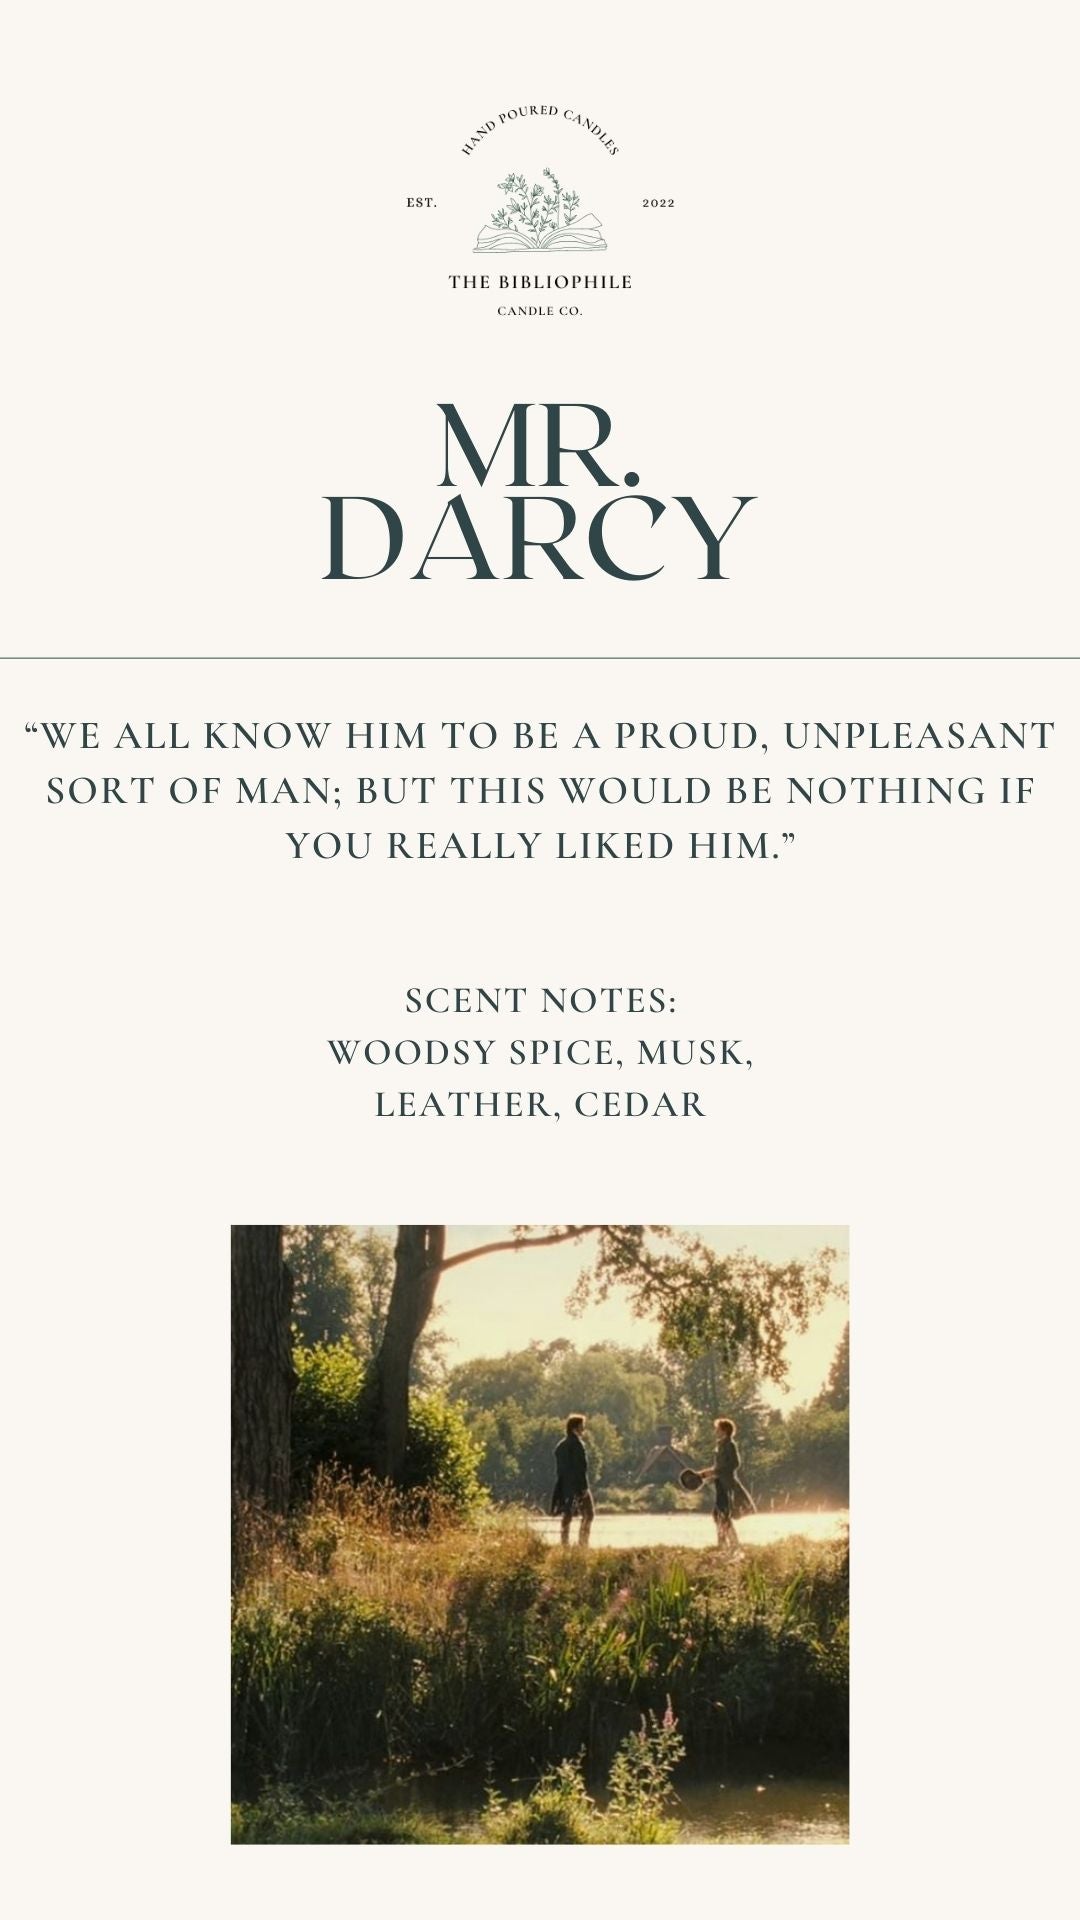 Mr. Darcy Scented Candle